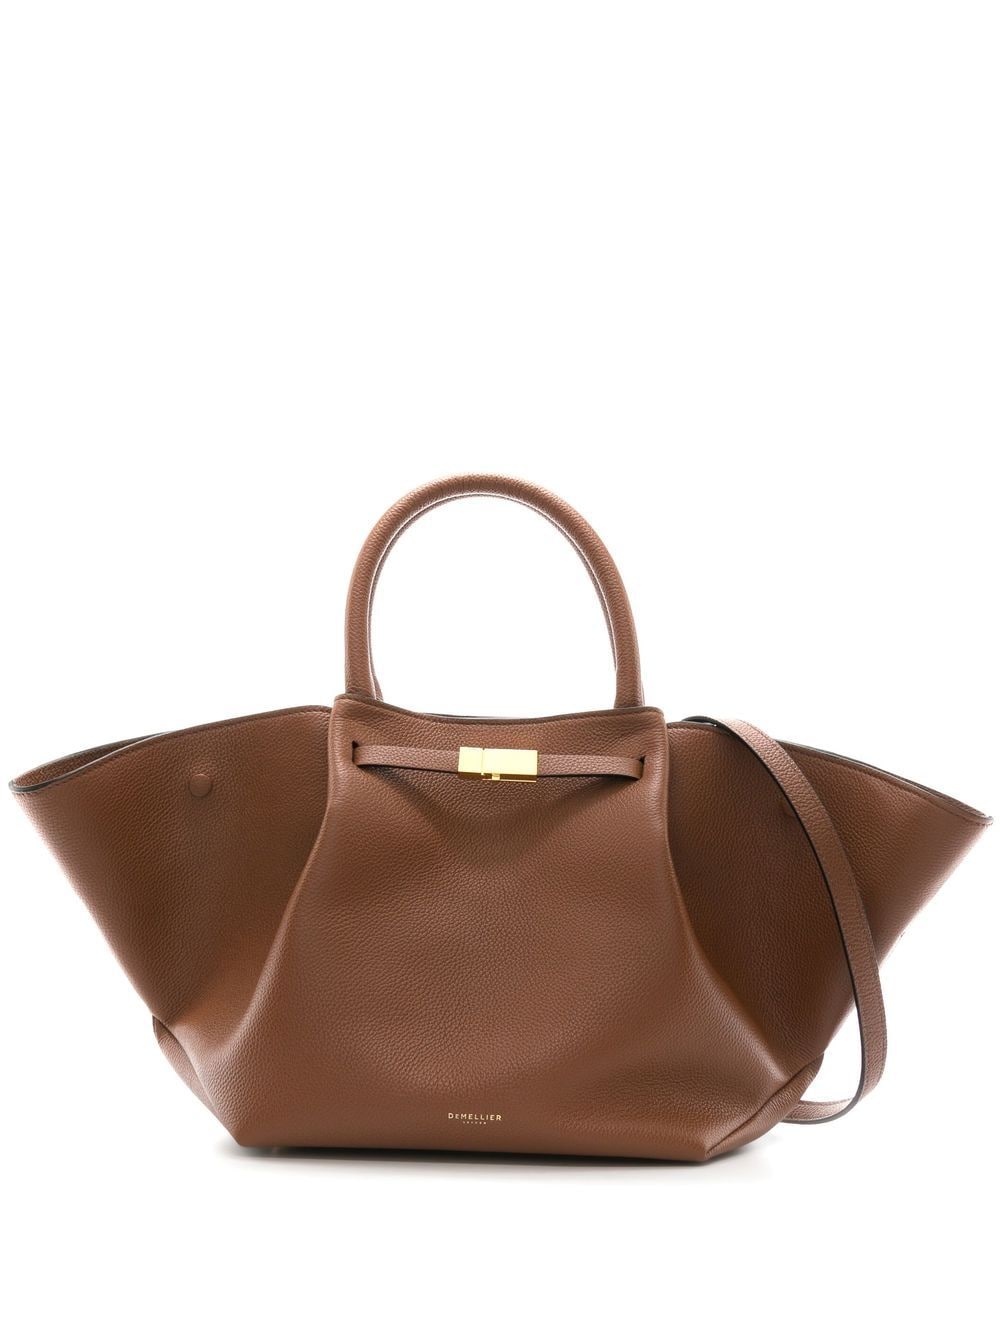 Demellier Oversized Leather Tote Bag In Brown